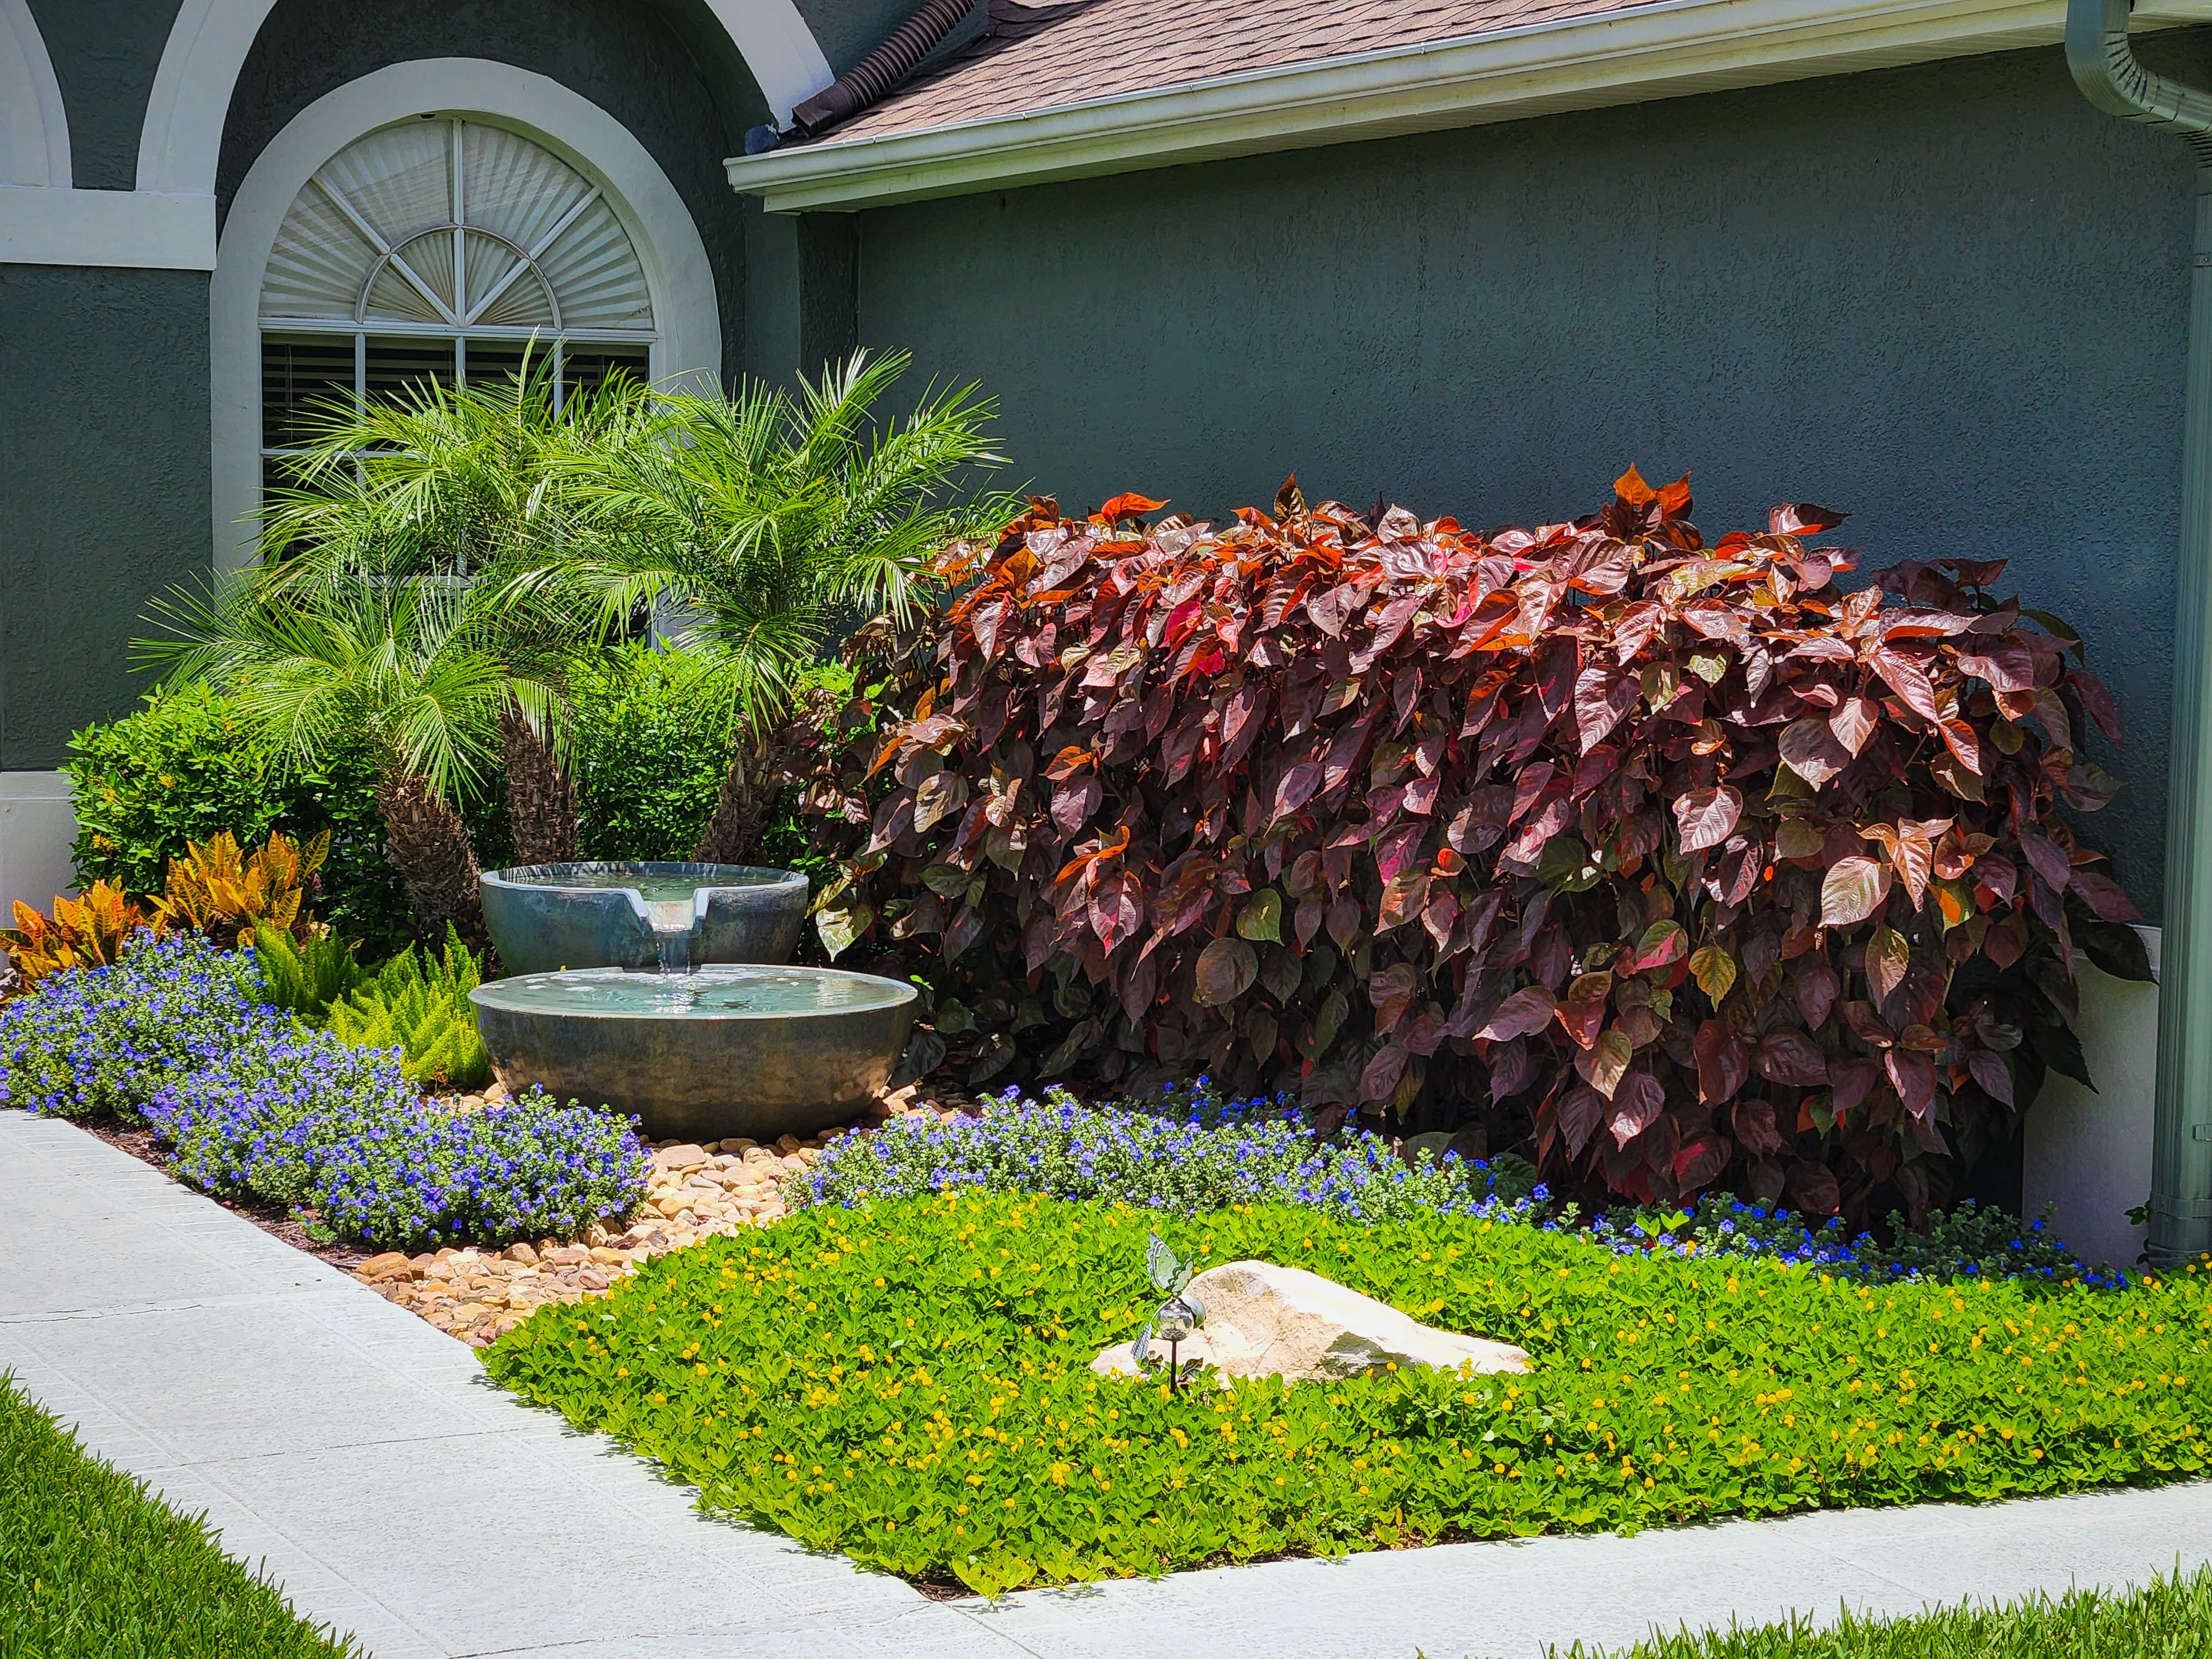 landscaping with water fountain, stone walkway and colorful plant garden